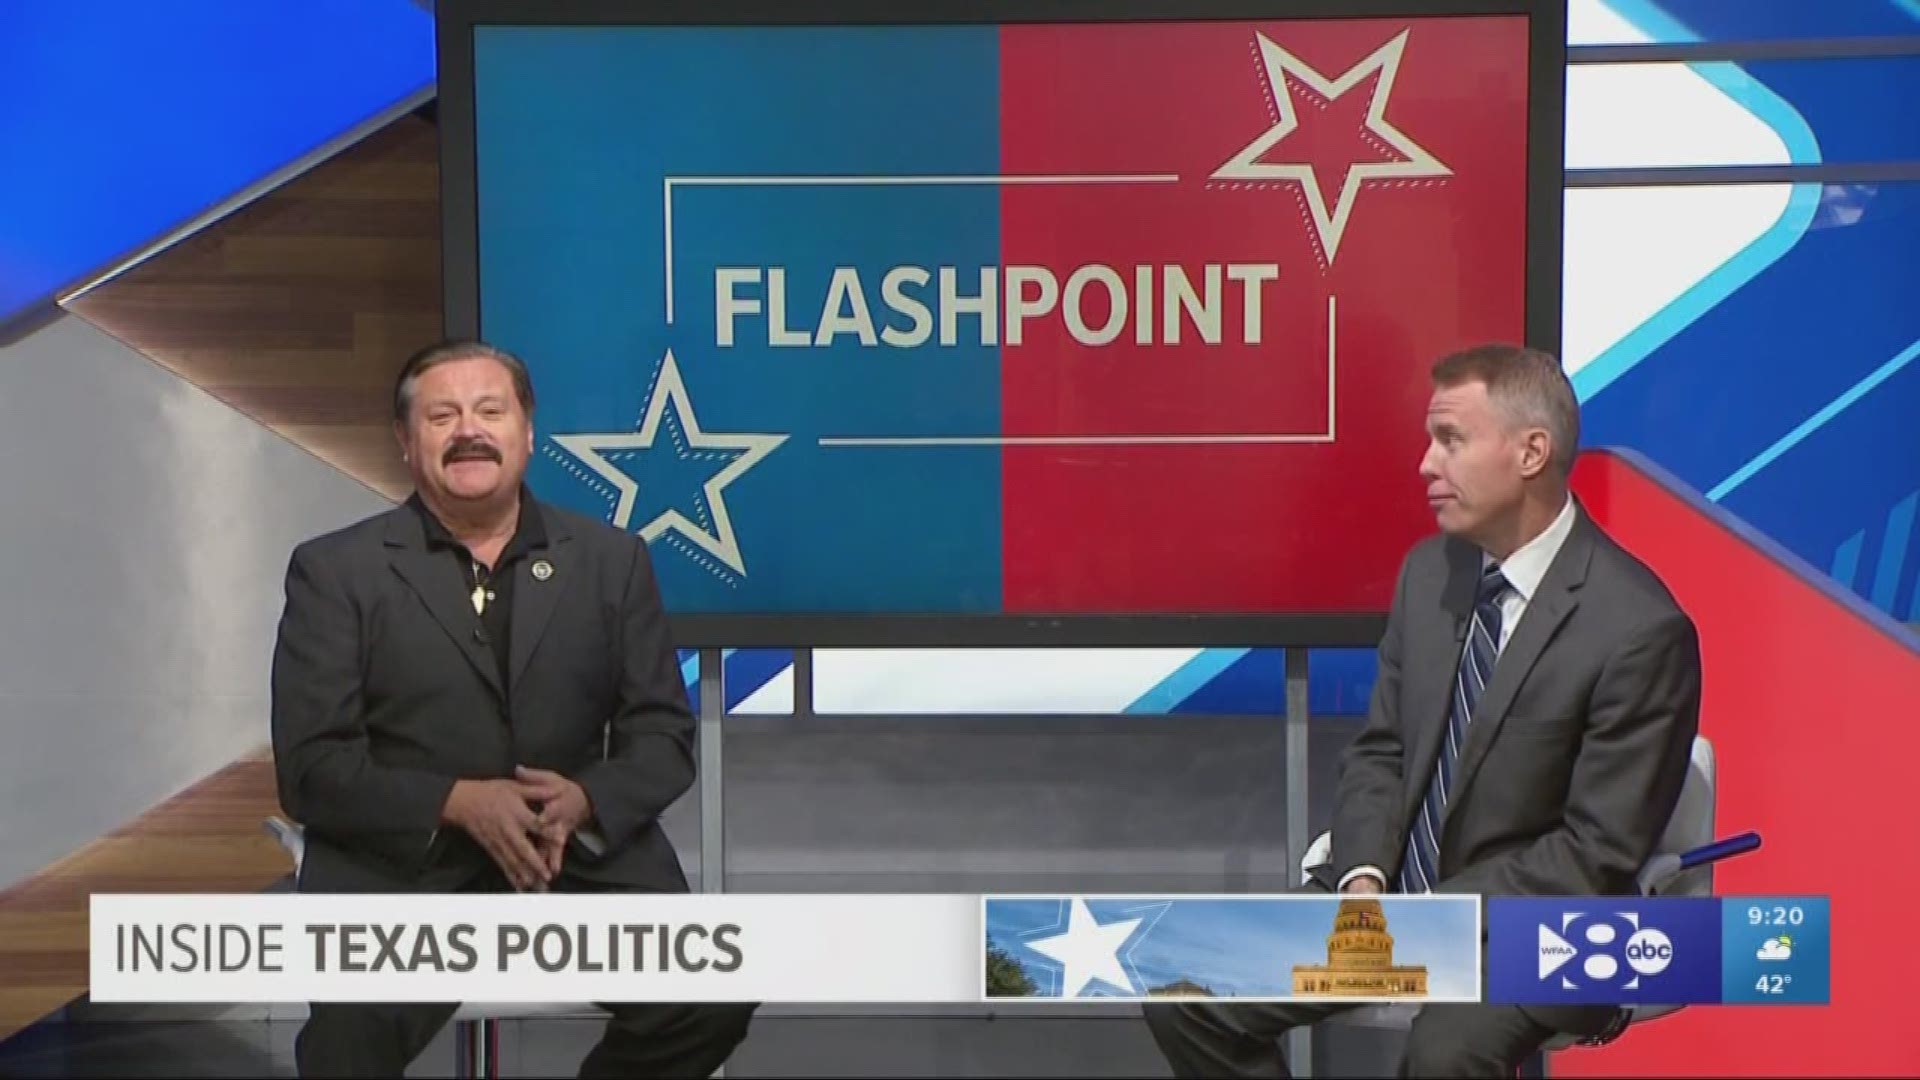 Wade Emmert, former chairman of the Dallas County Republican Party, and LULAC's National President Domingo Garcia discuss primary states on this week's Flashpoint.